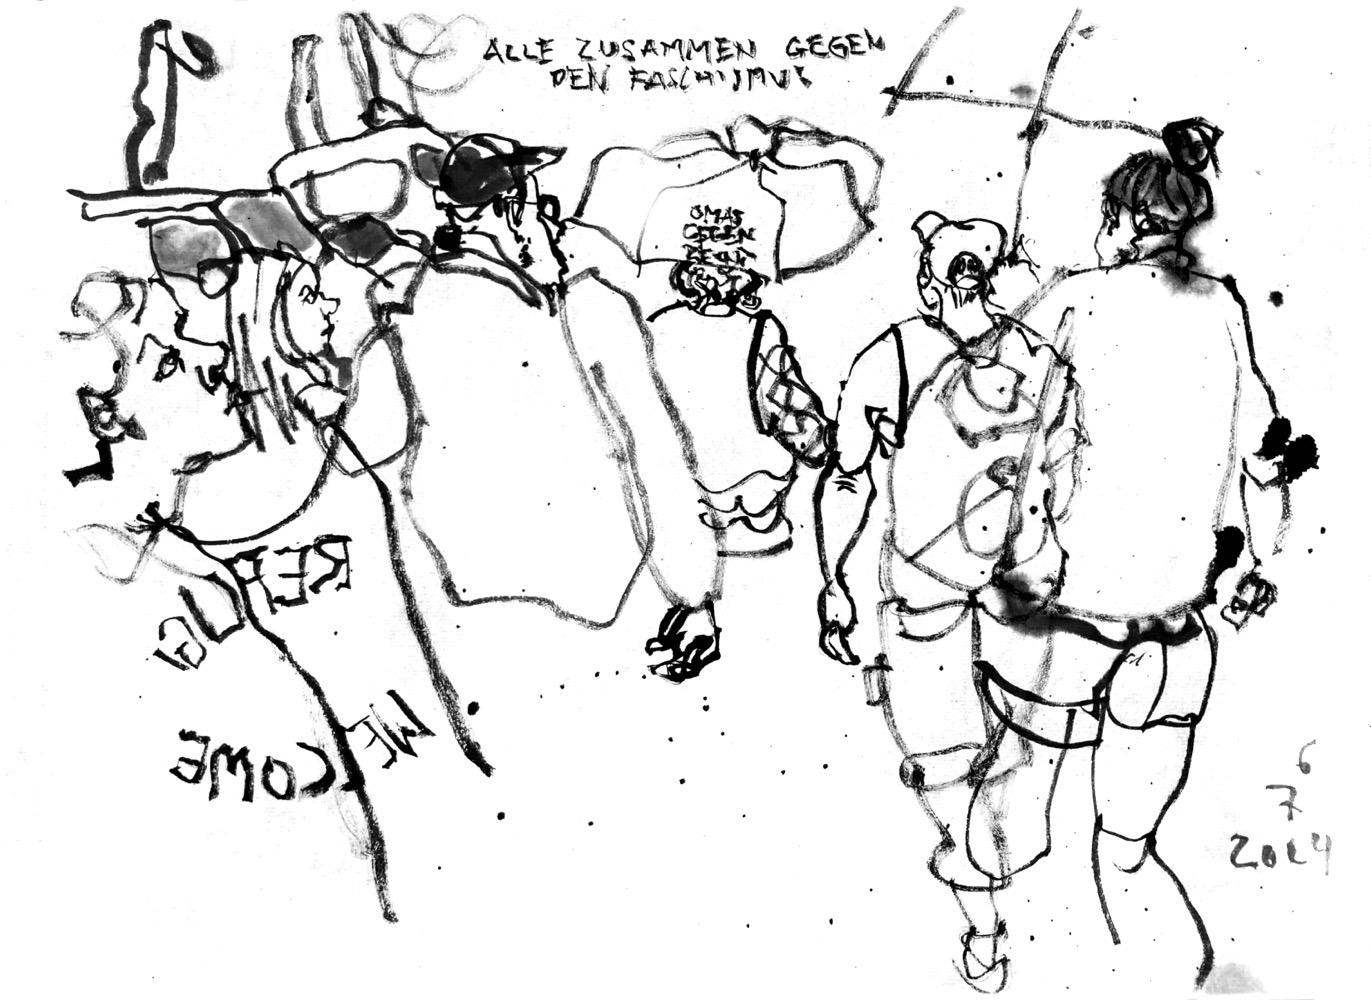 Scrawly ink drawing of a demonstration, walking. A banner with ‘Refugees Welcome’ on it is carried by a man and a woman, a woman has an umbrella, branded with ‘omas gegen rechtsk, the slogam ‘alle zusammen! Gegen den Faschismus’ is written on the top of the picture.